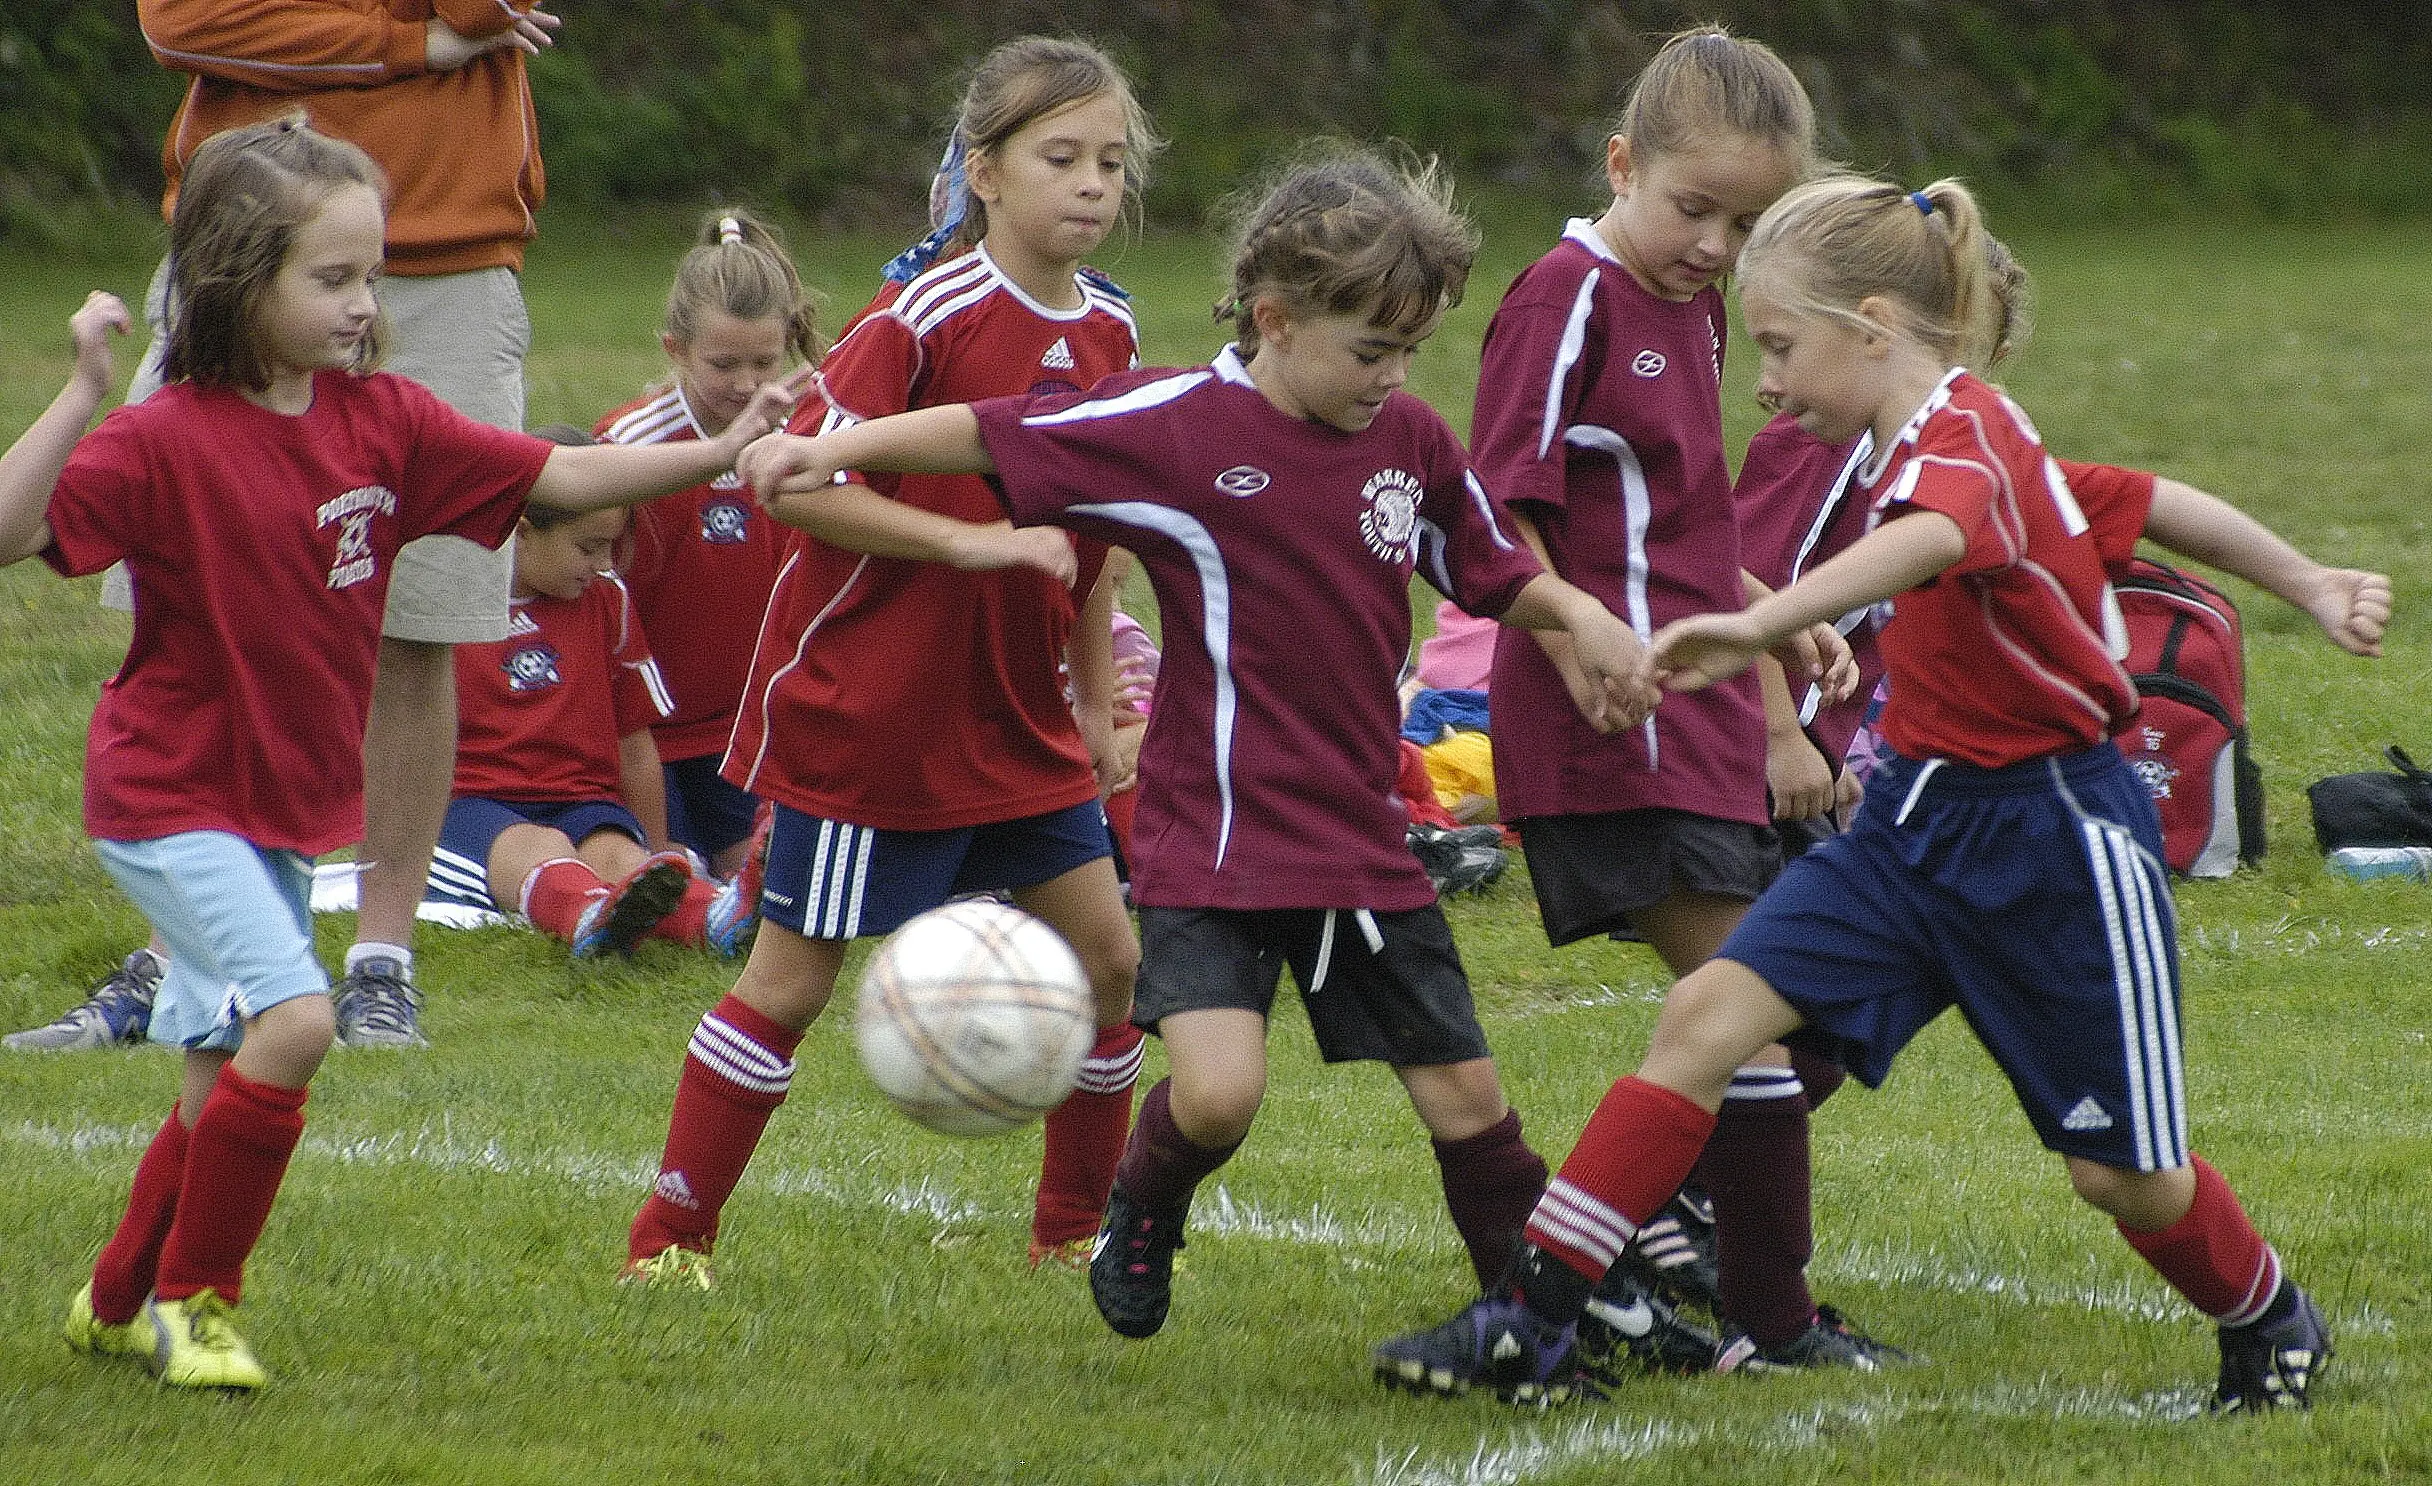 Featured image: Keep Girls in Youth Sports with These 5 Simple Tips